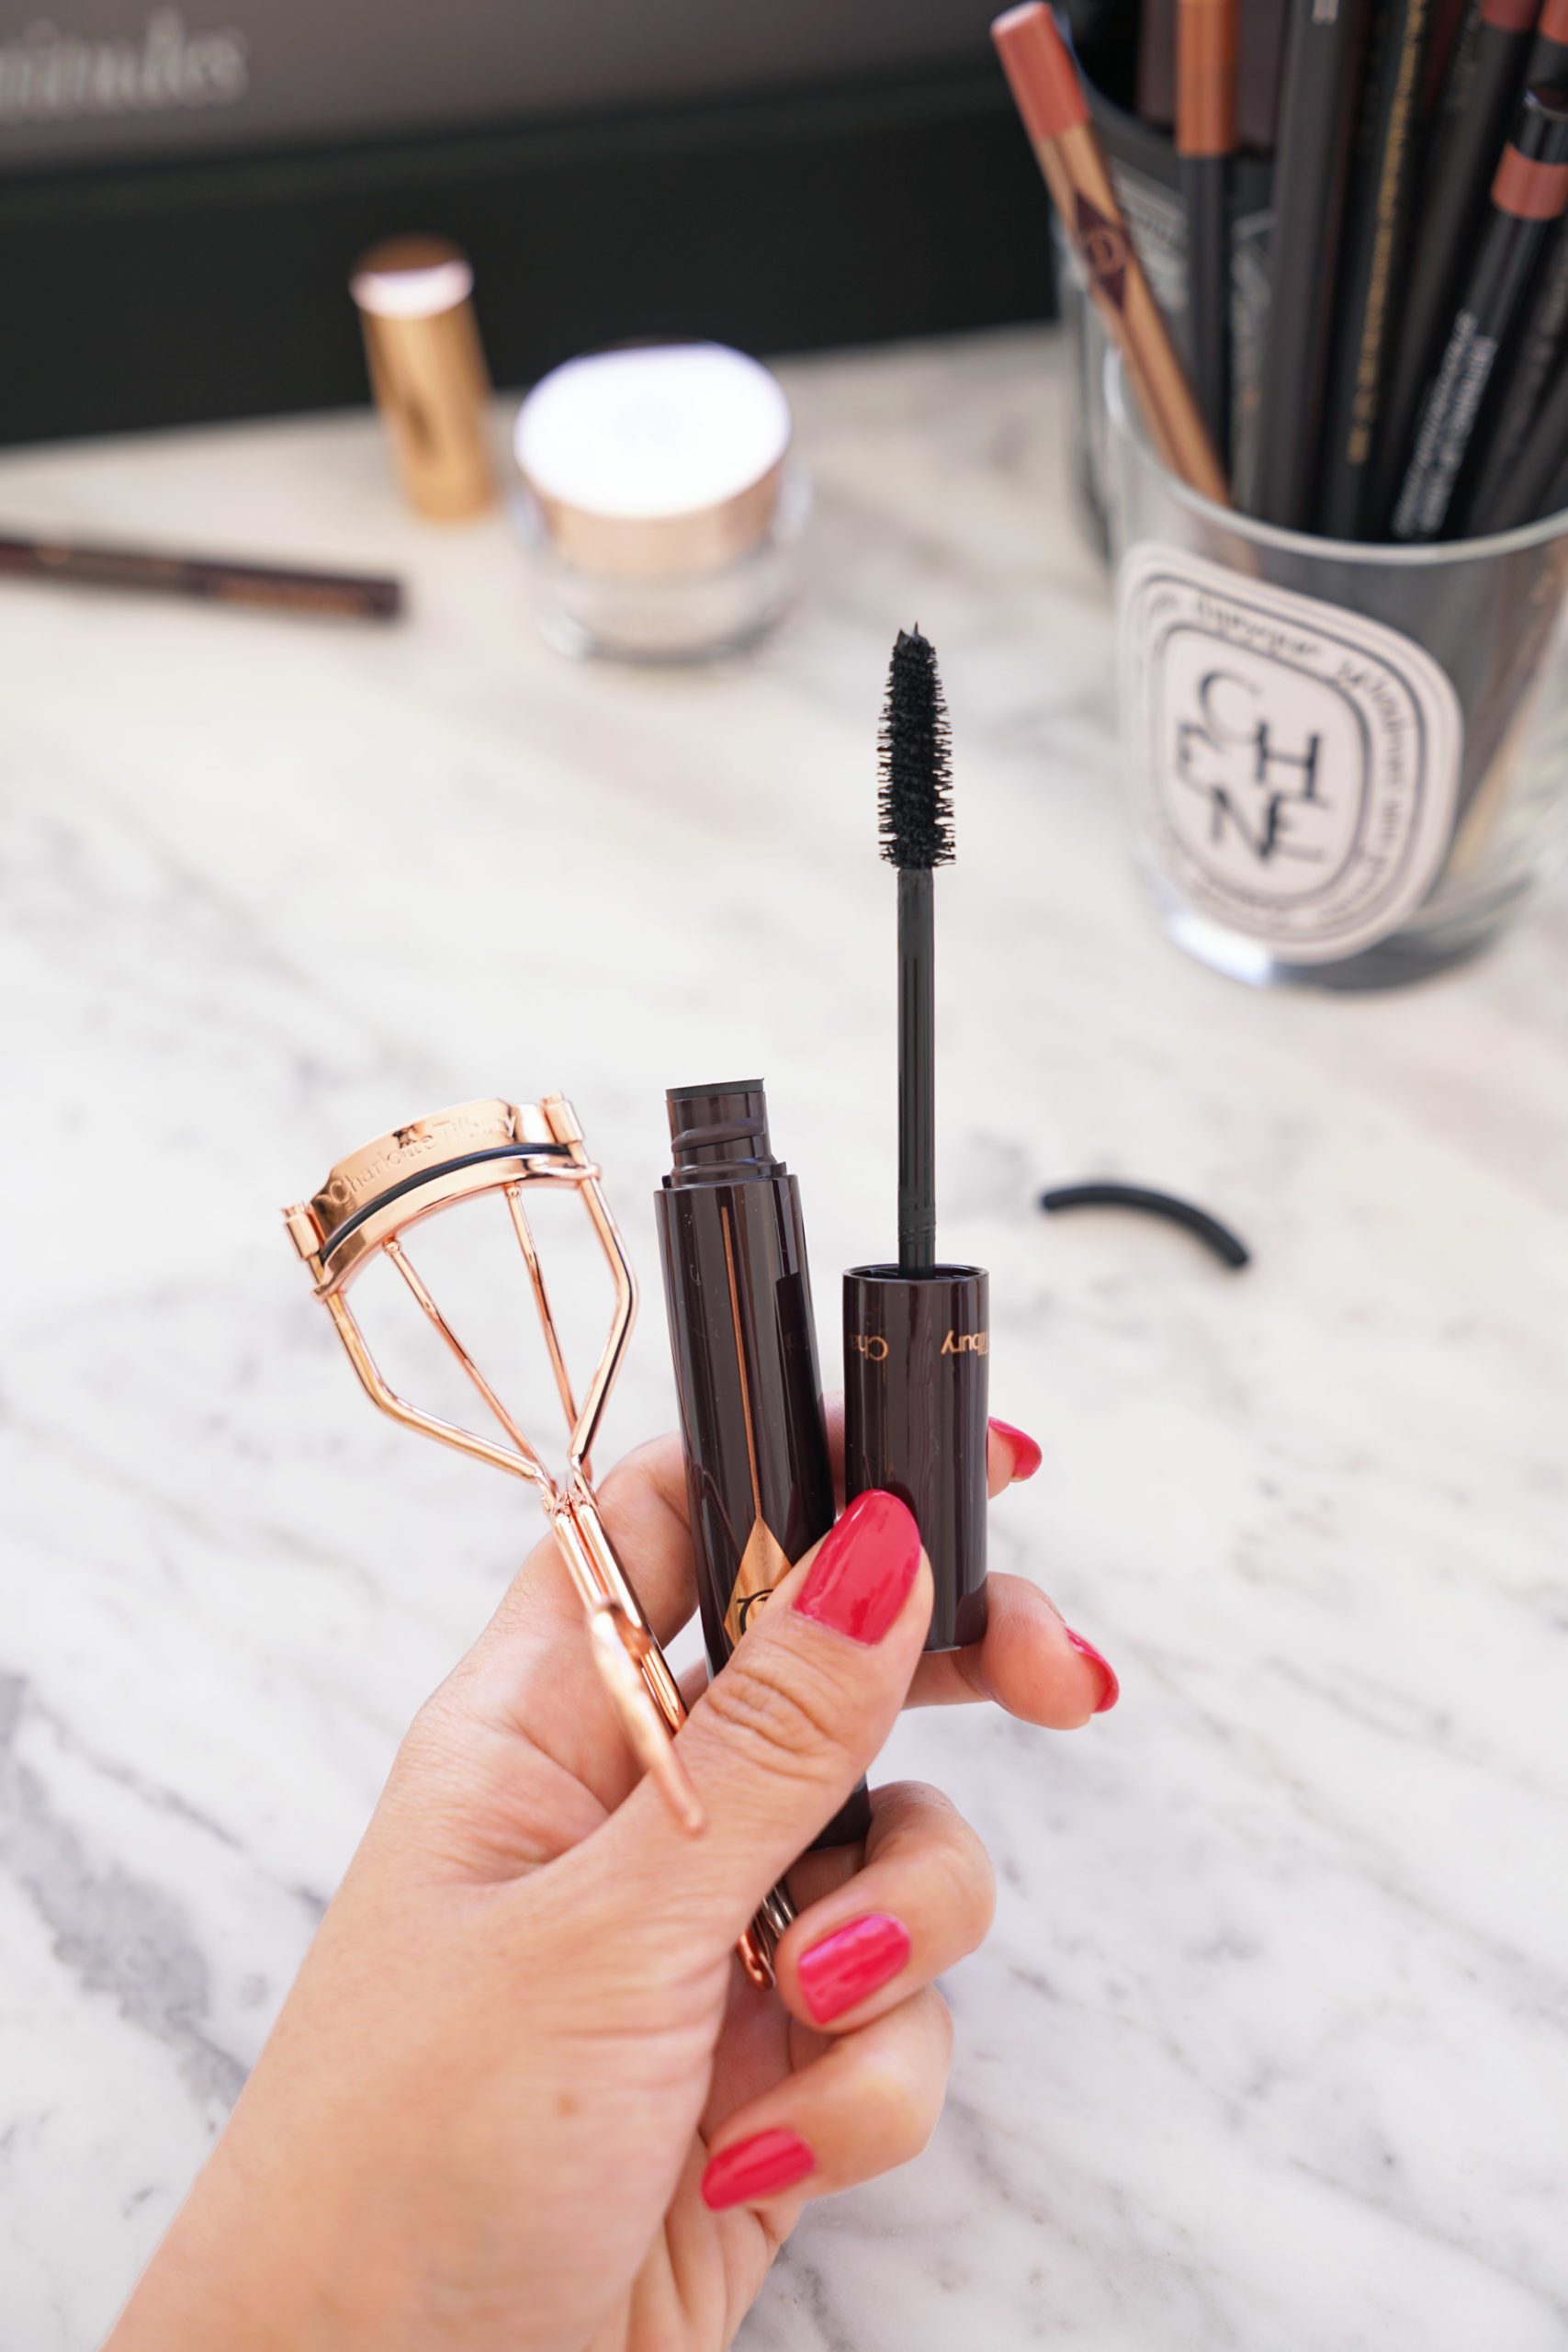 Eyelash Curler Archives - The Beauty Look Book